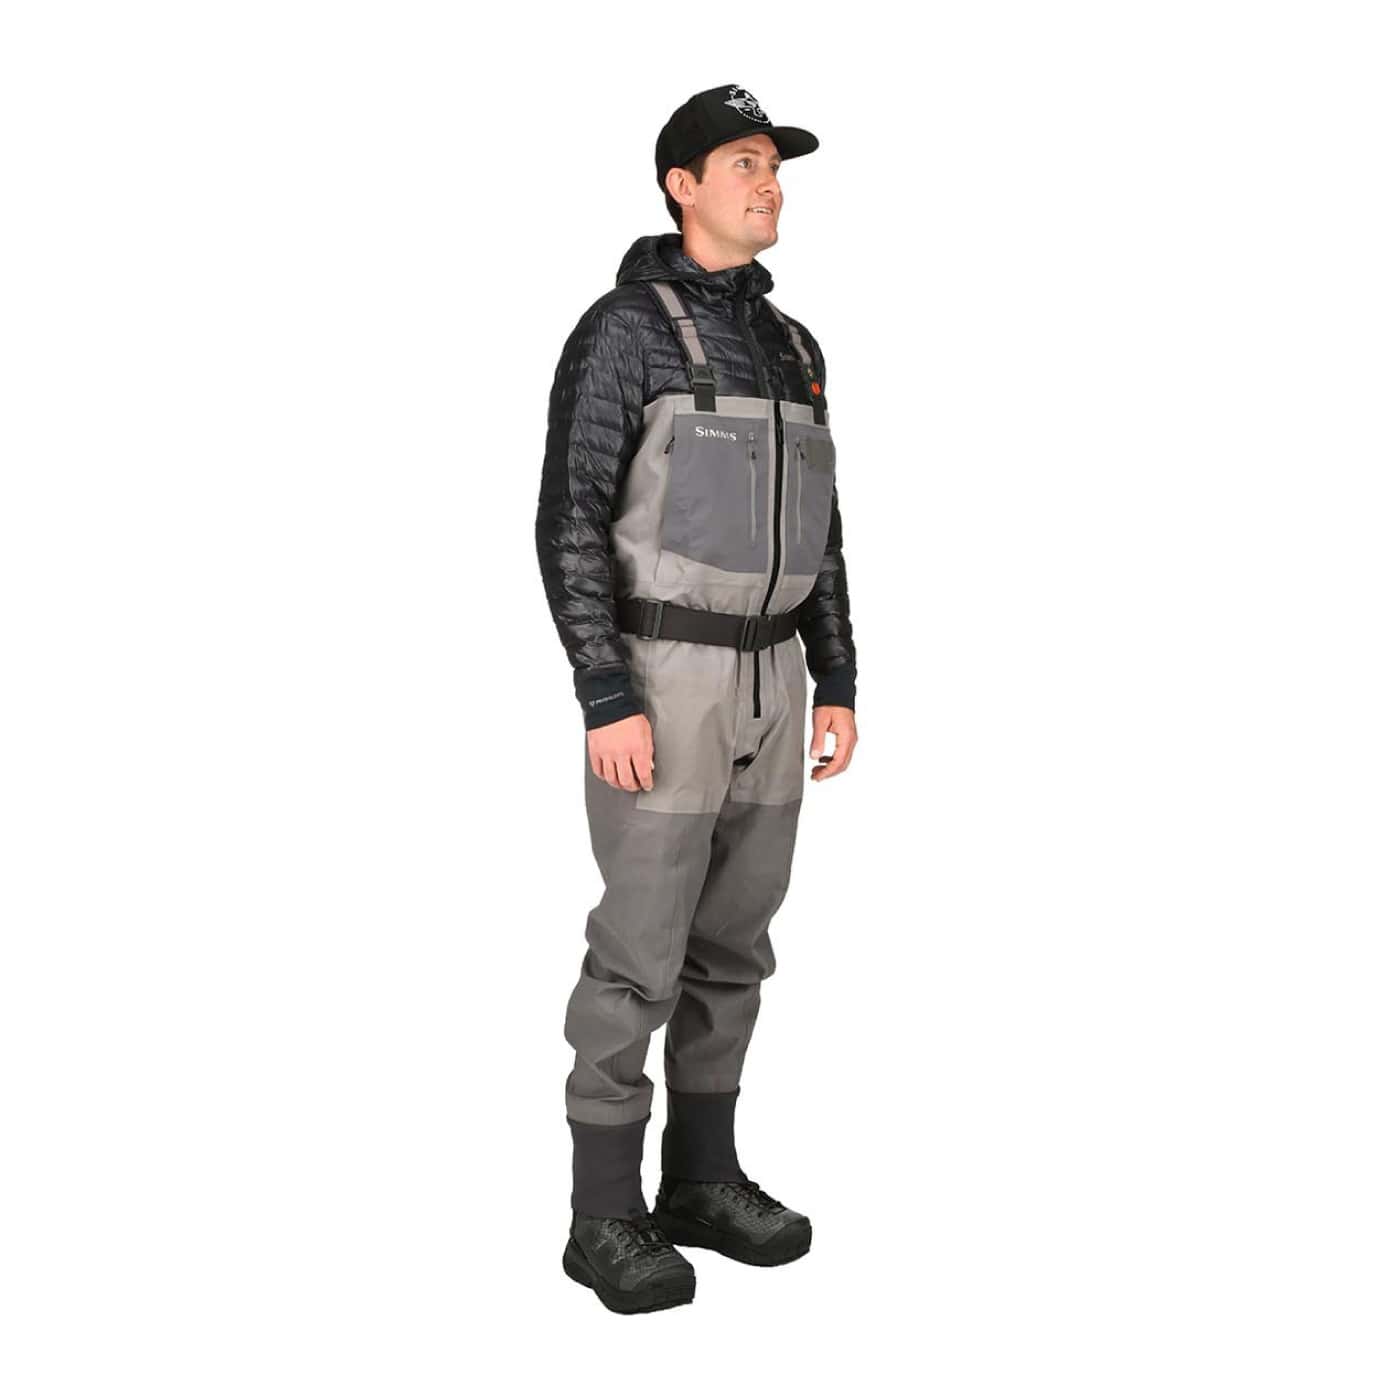 https://cdn.shopify.com/s/files/1/0510/1705/6454/products/SIMMS-MENS-G4Z-WADERS-STOCKINGFOOT-SLATE-RIGHT-min.jpg?v=1655921167&width=1600&height=1600&crop=center